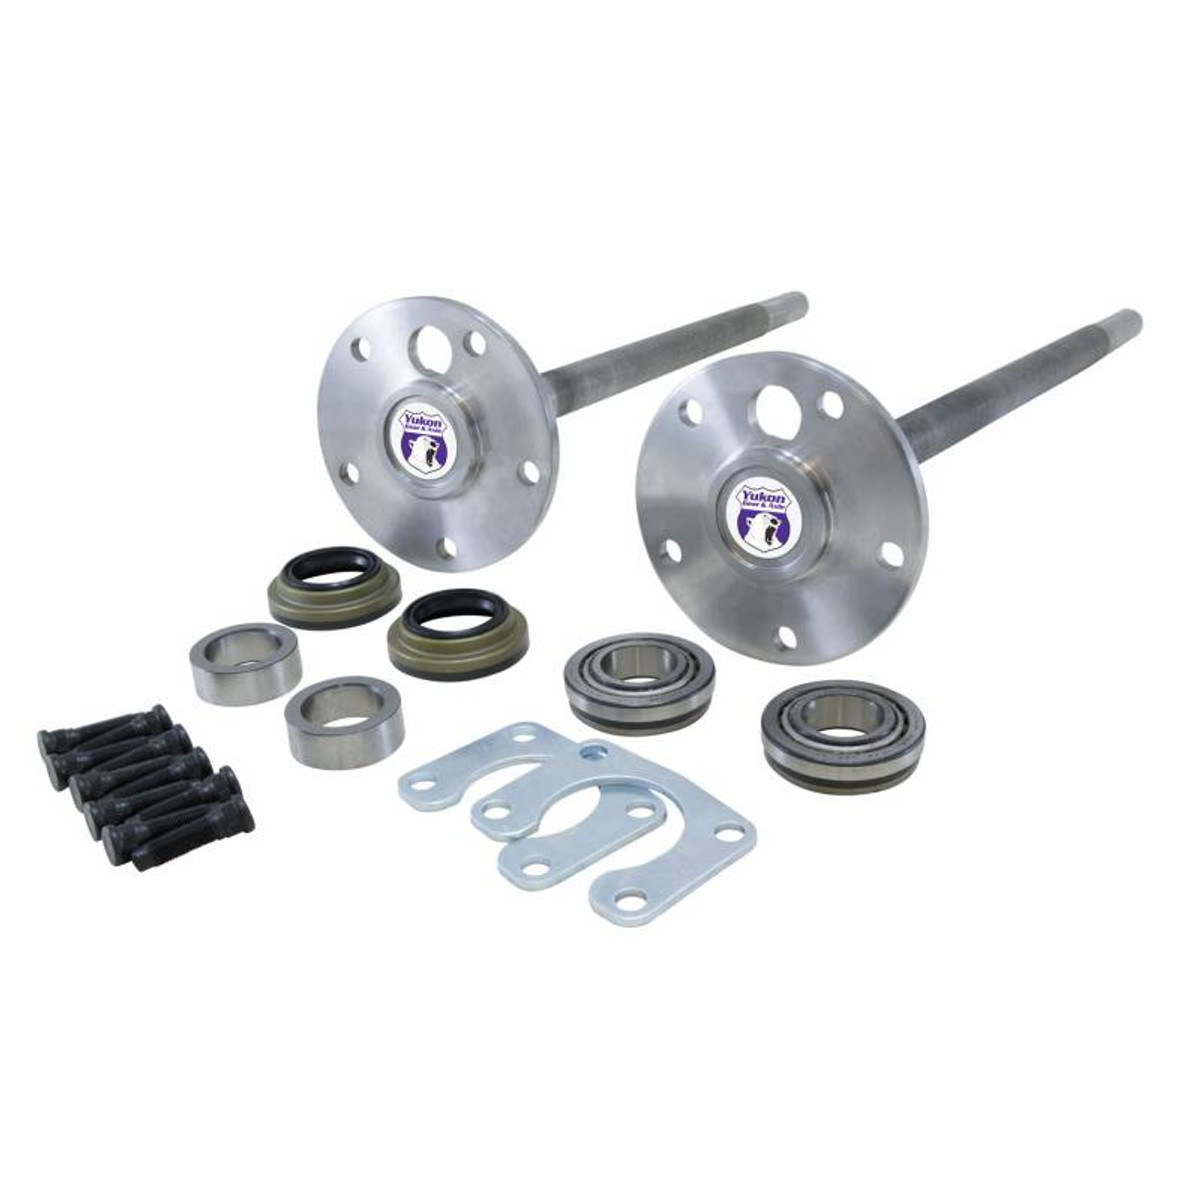 Yukon 1541H Alloy Rear Axle Kit For Ford 9 Inch Bronco From 66-75 With 35 Splines YA FBRONCO-2-35